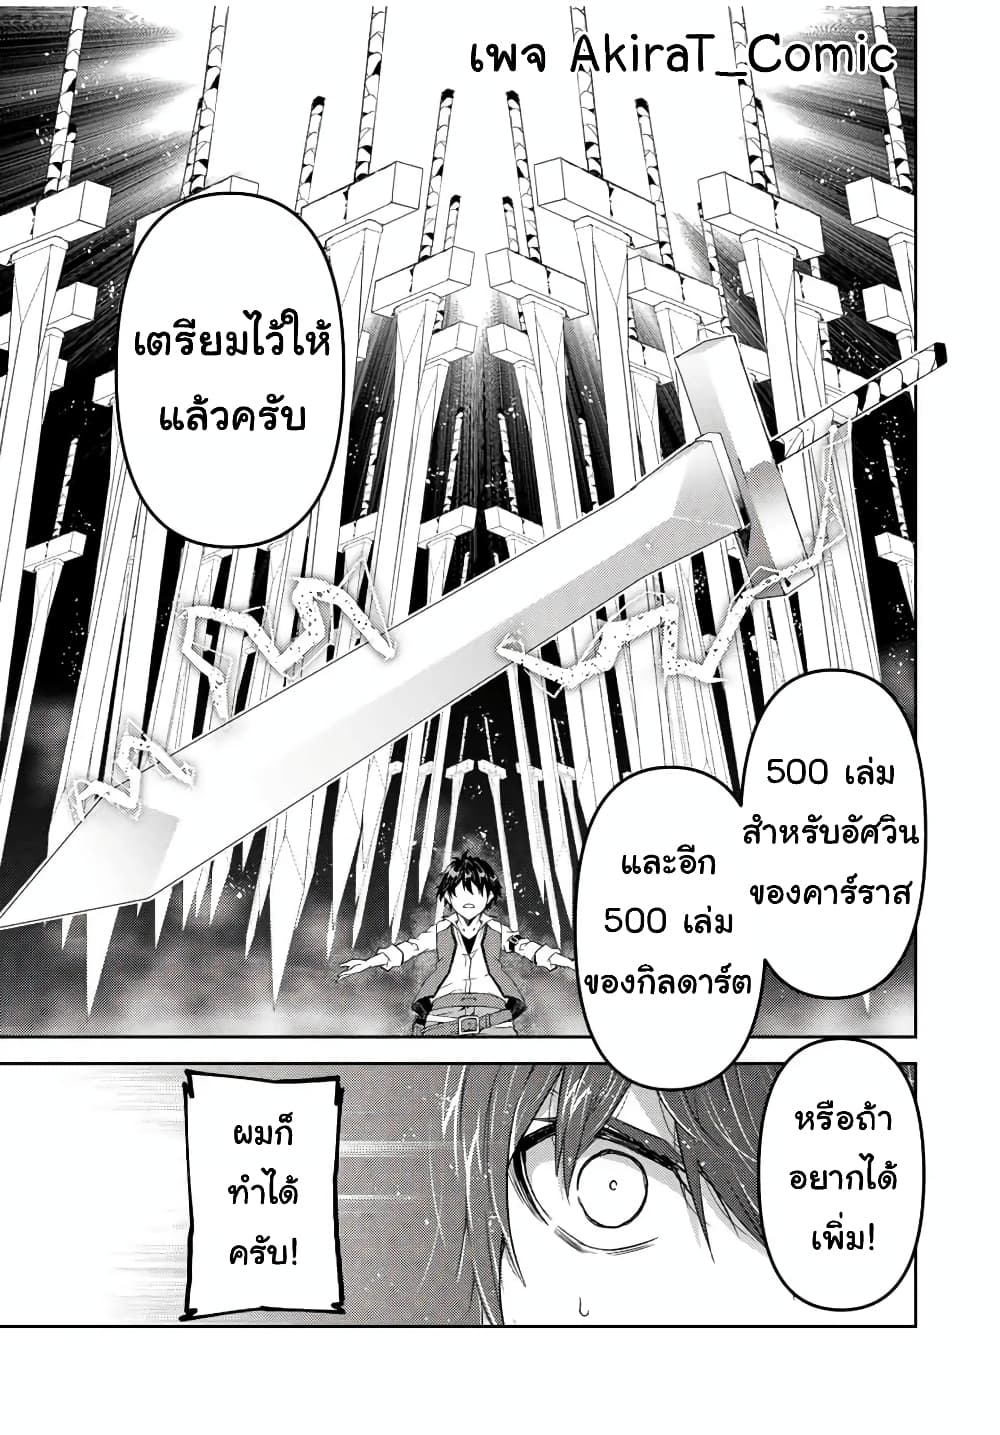 The Weakest Occupation "Blacksmith", but It's Actually the Strongest ช่างตีเหล็กอาชีพกระจอก? 50-50